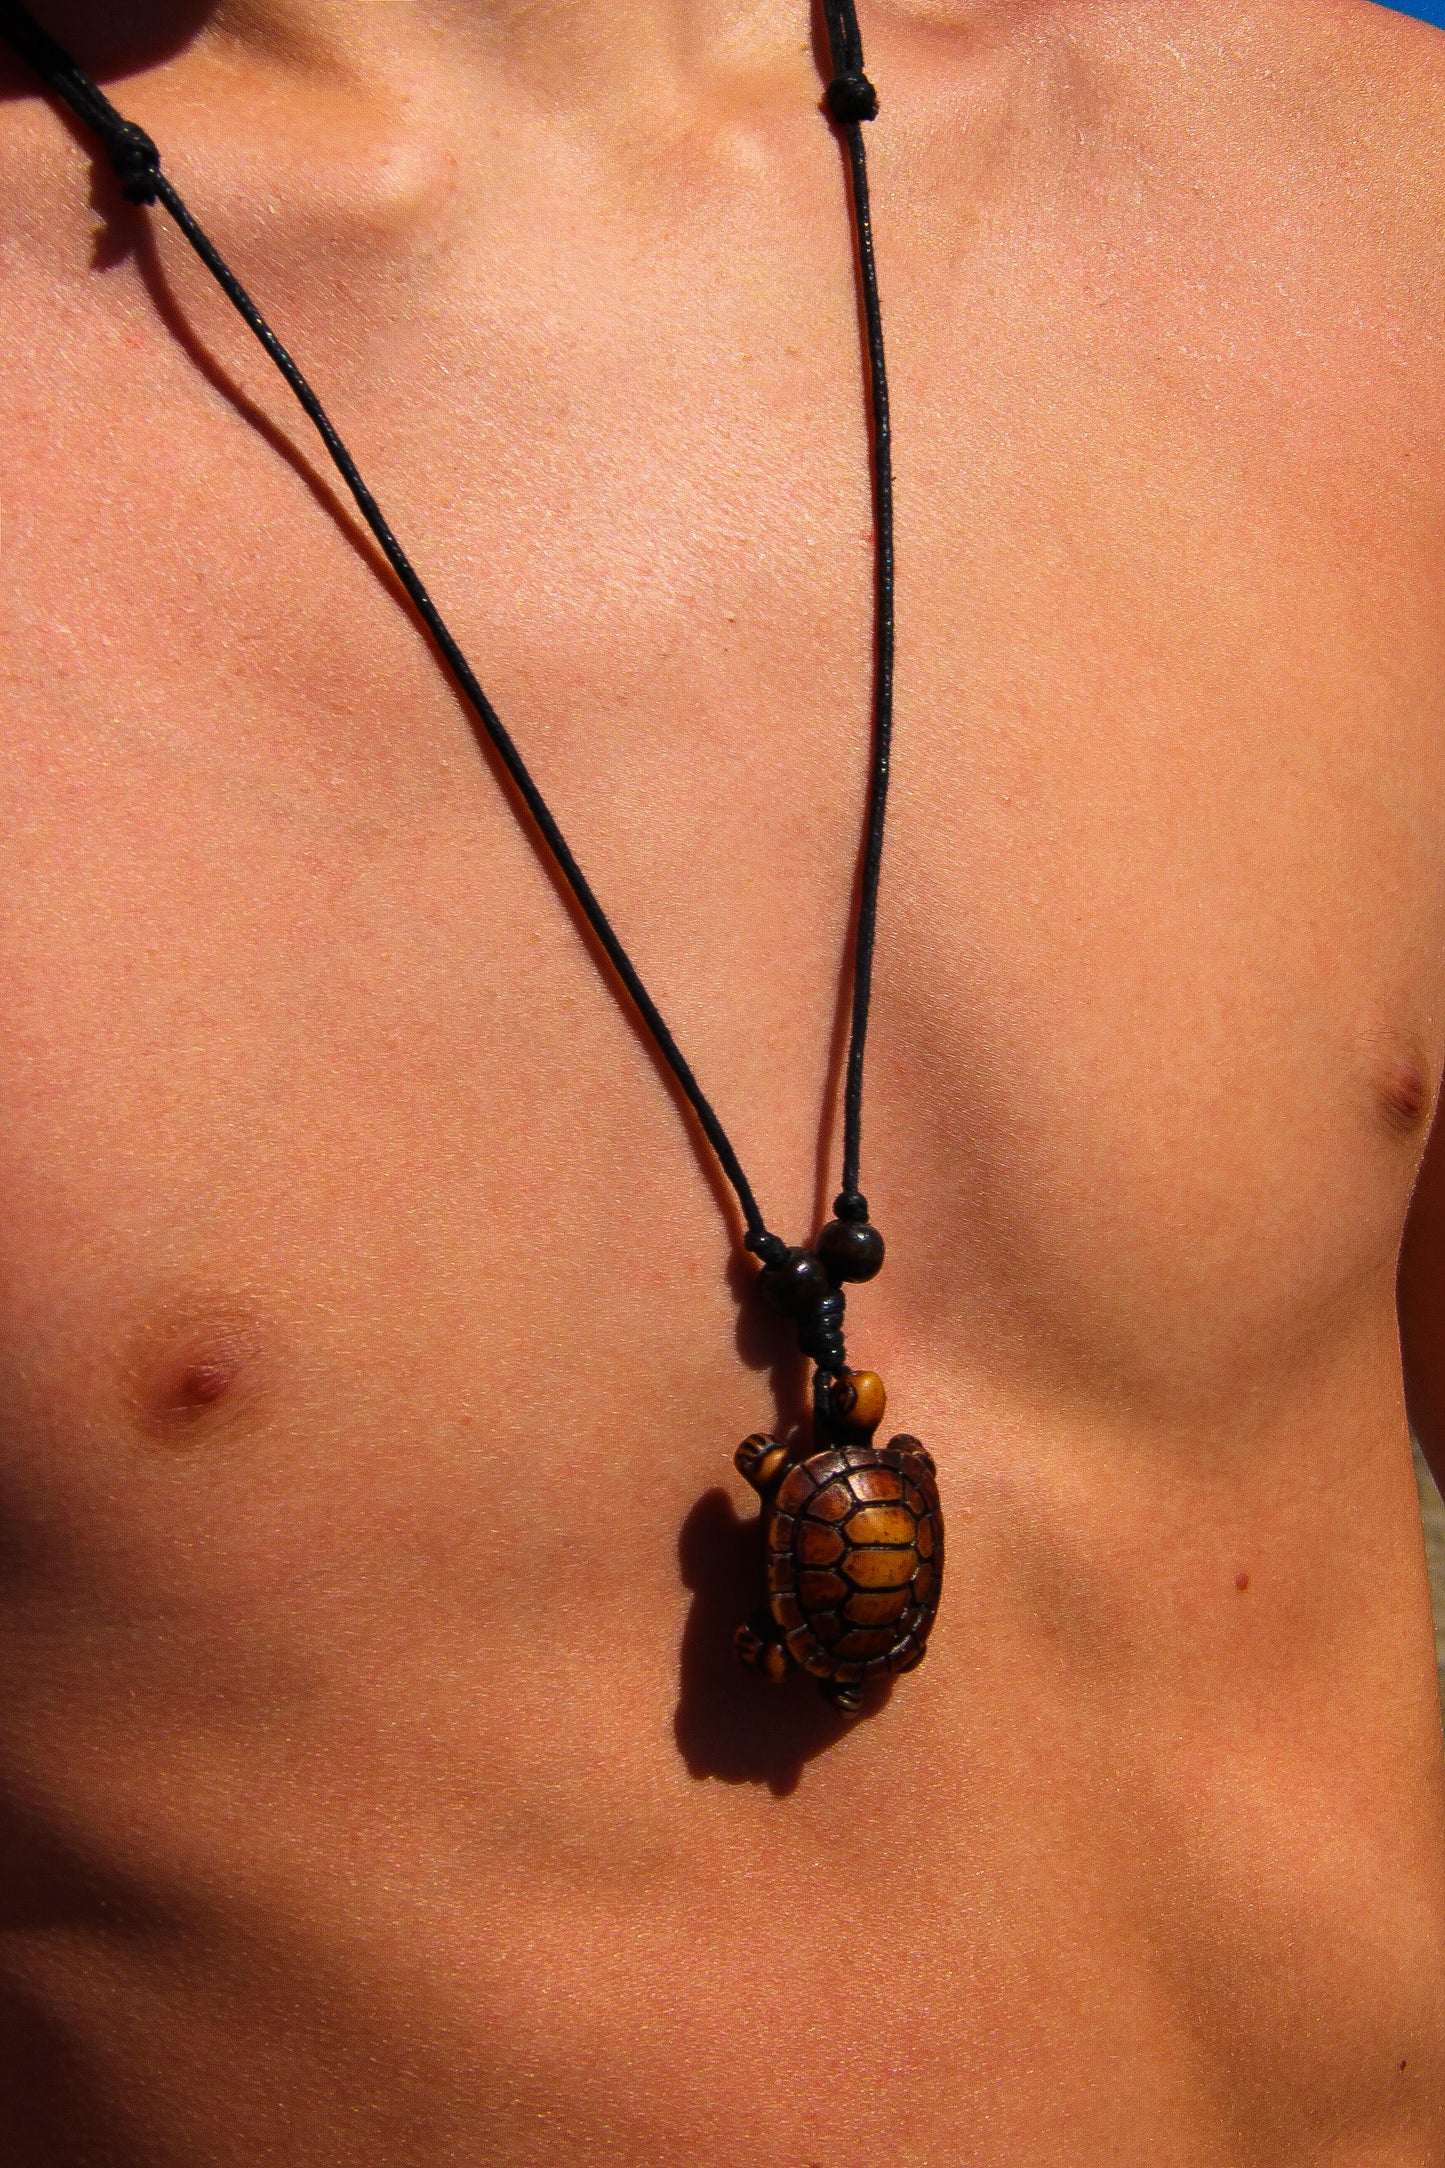 Male model with bare chest wearing a black necklace with carved sea turtle choker